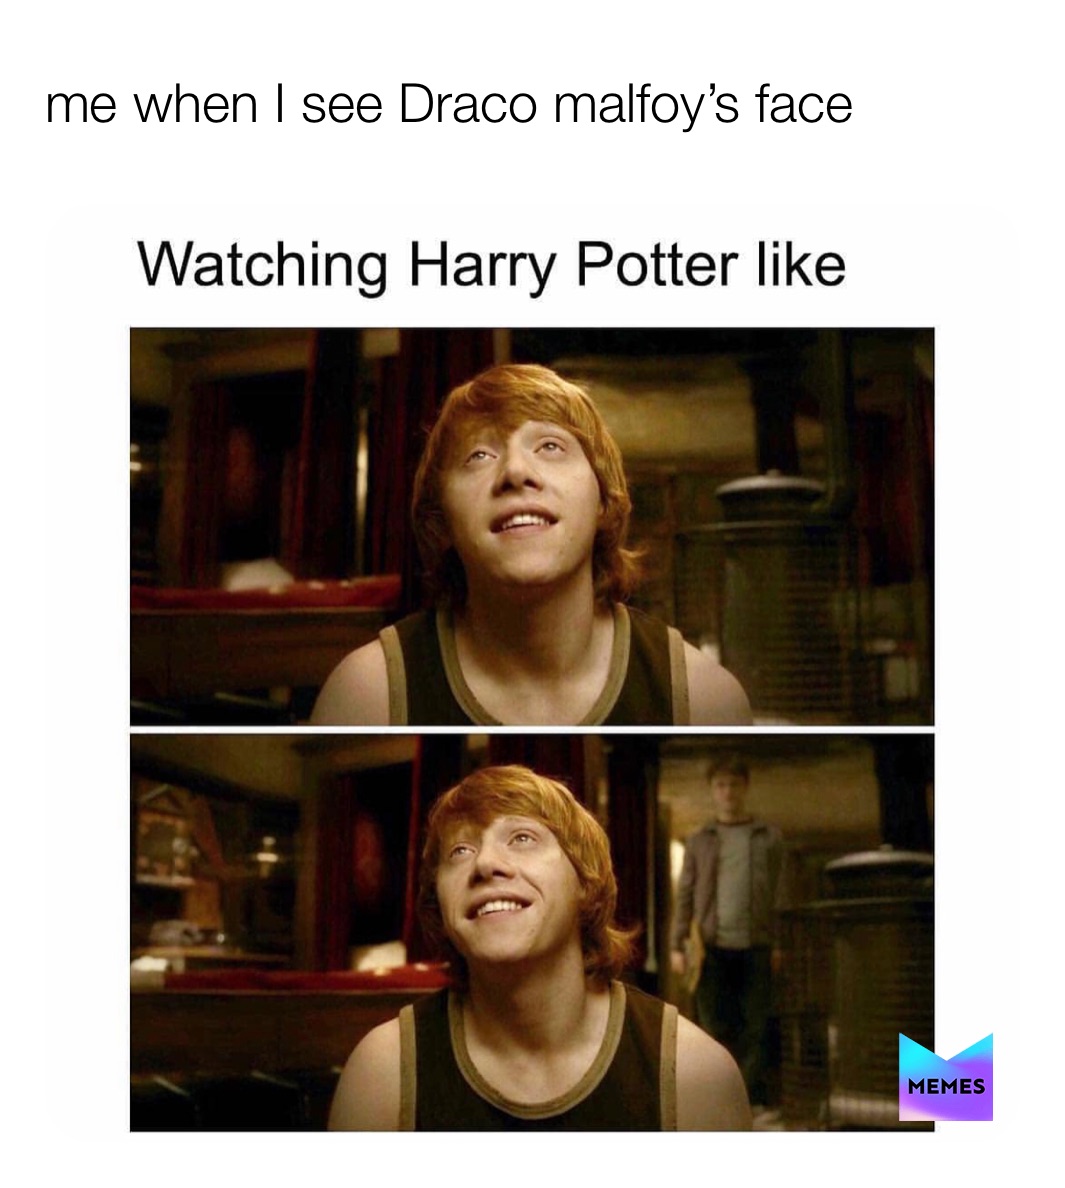 Post by @Draco_malfoy